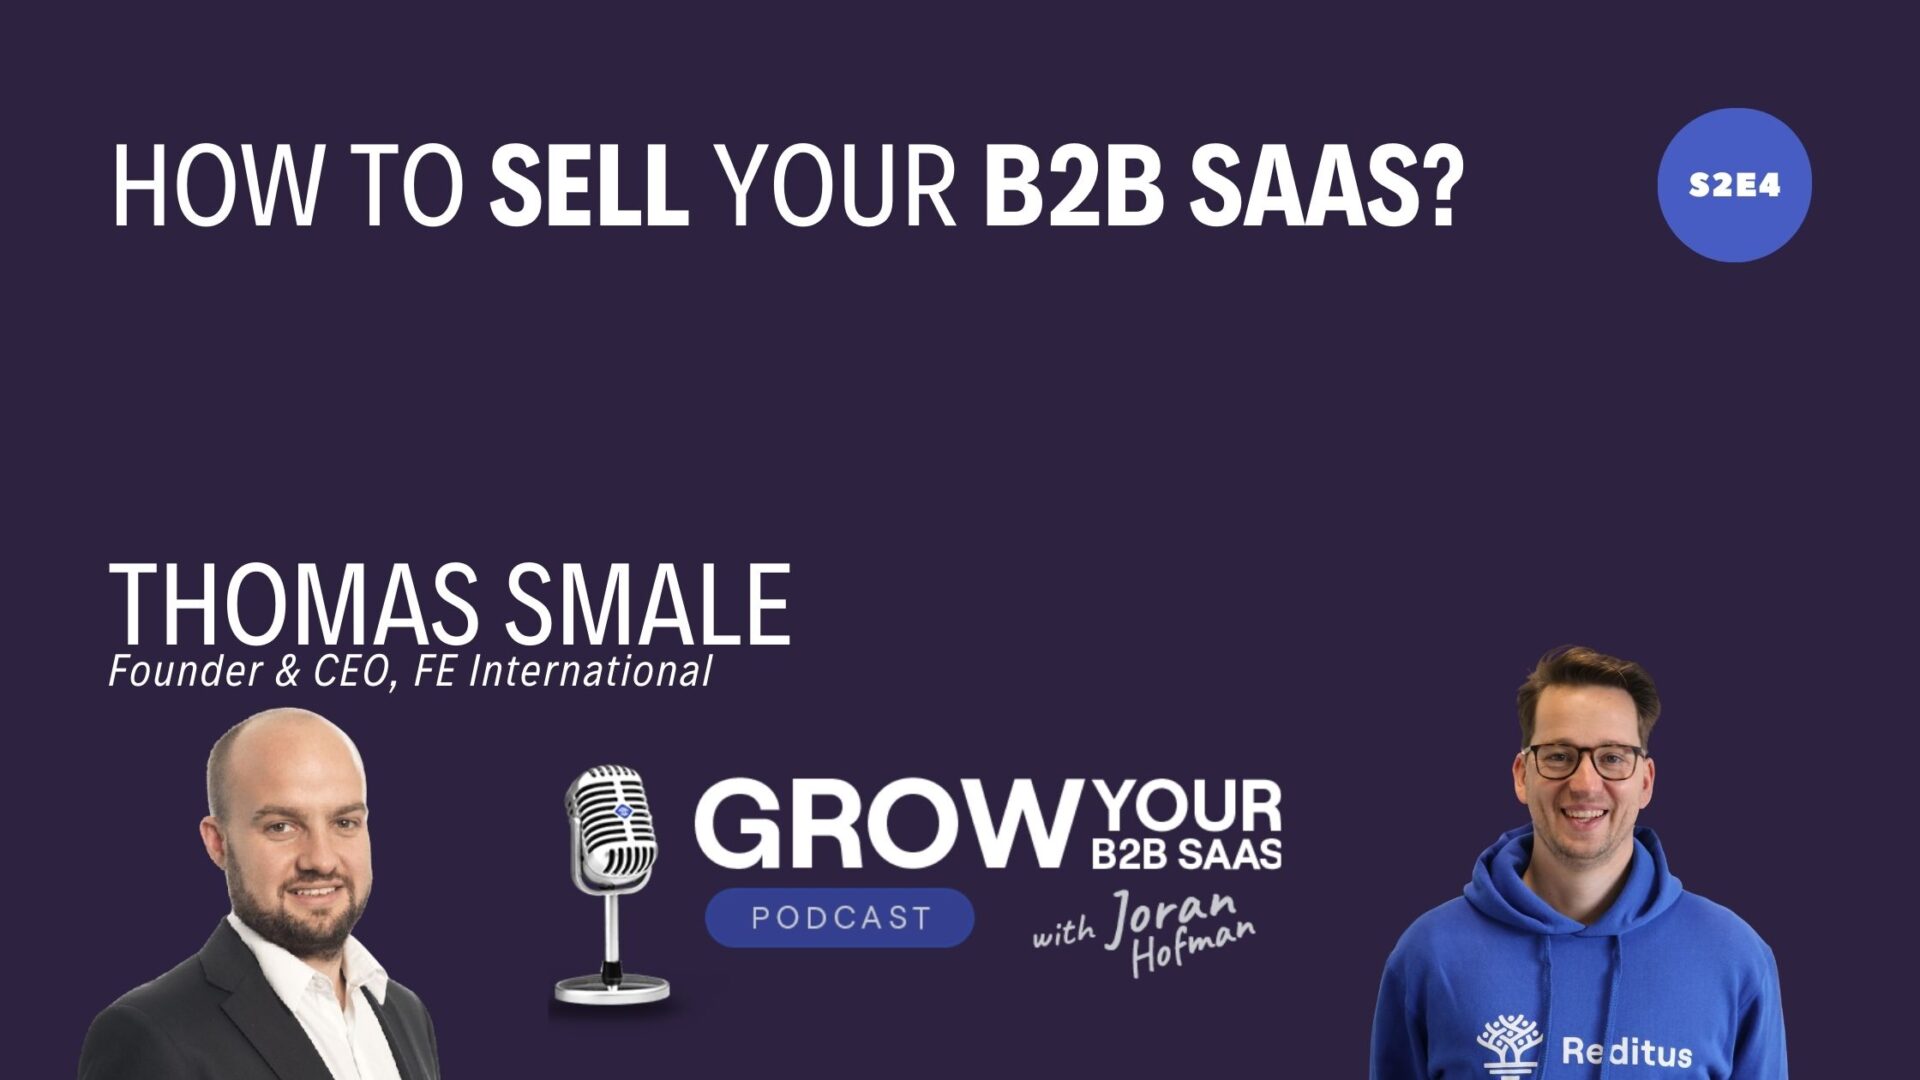 S2E4 – How to sell your B2B SaaS? with Thomas Smale